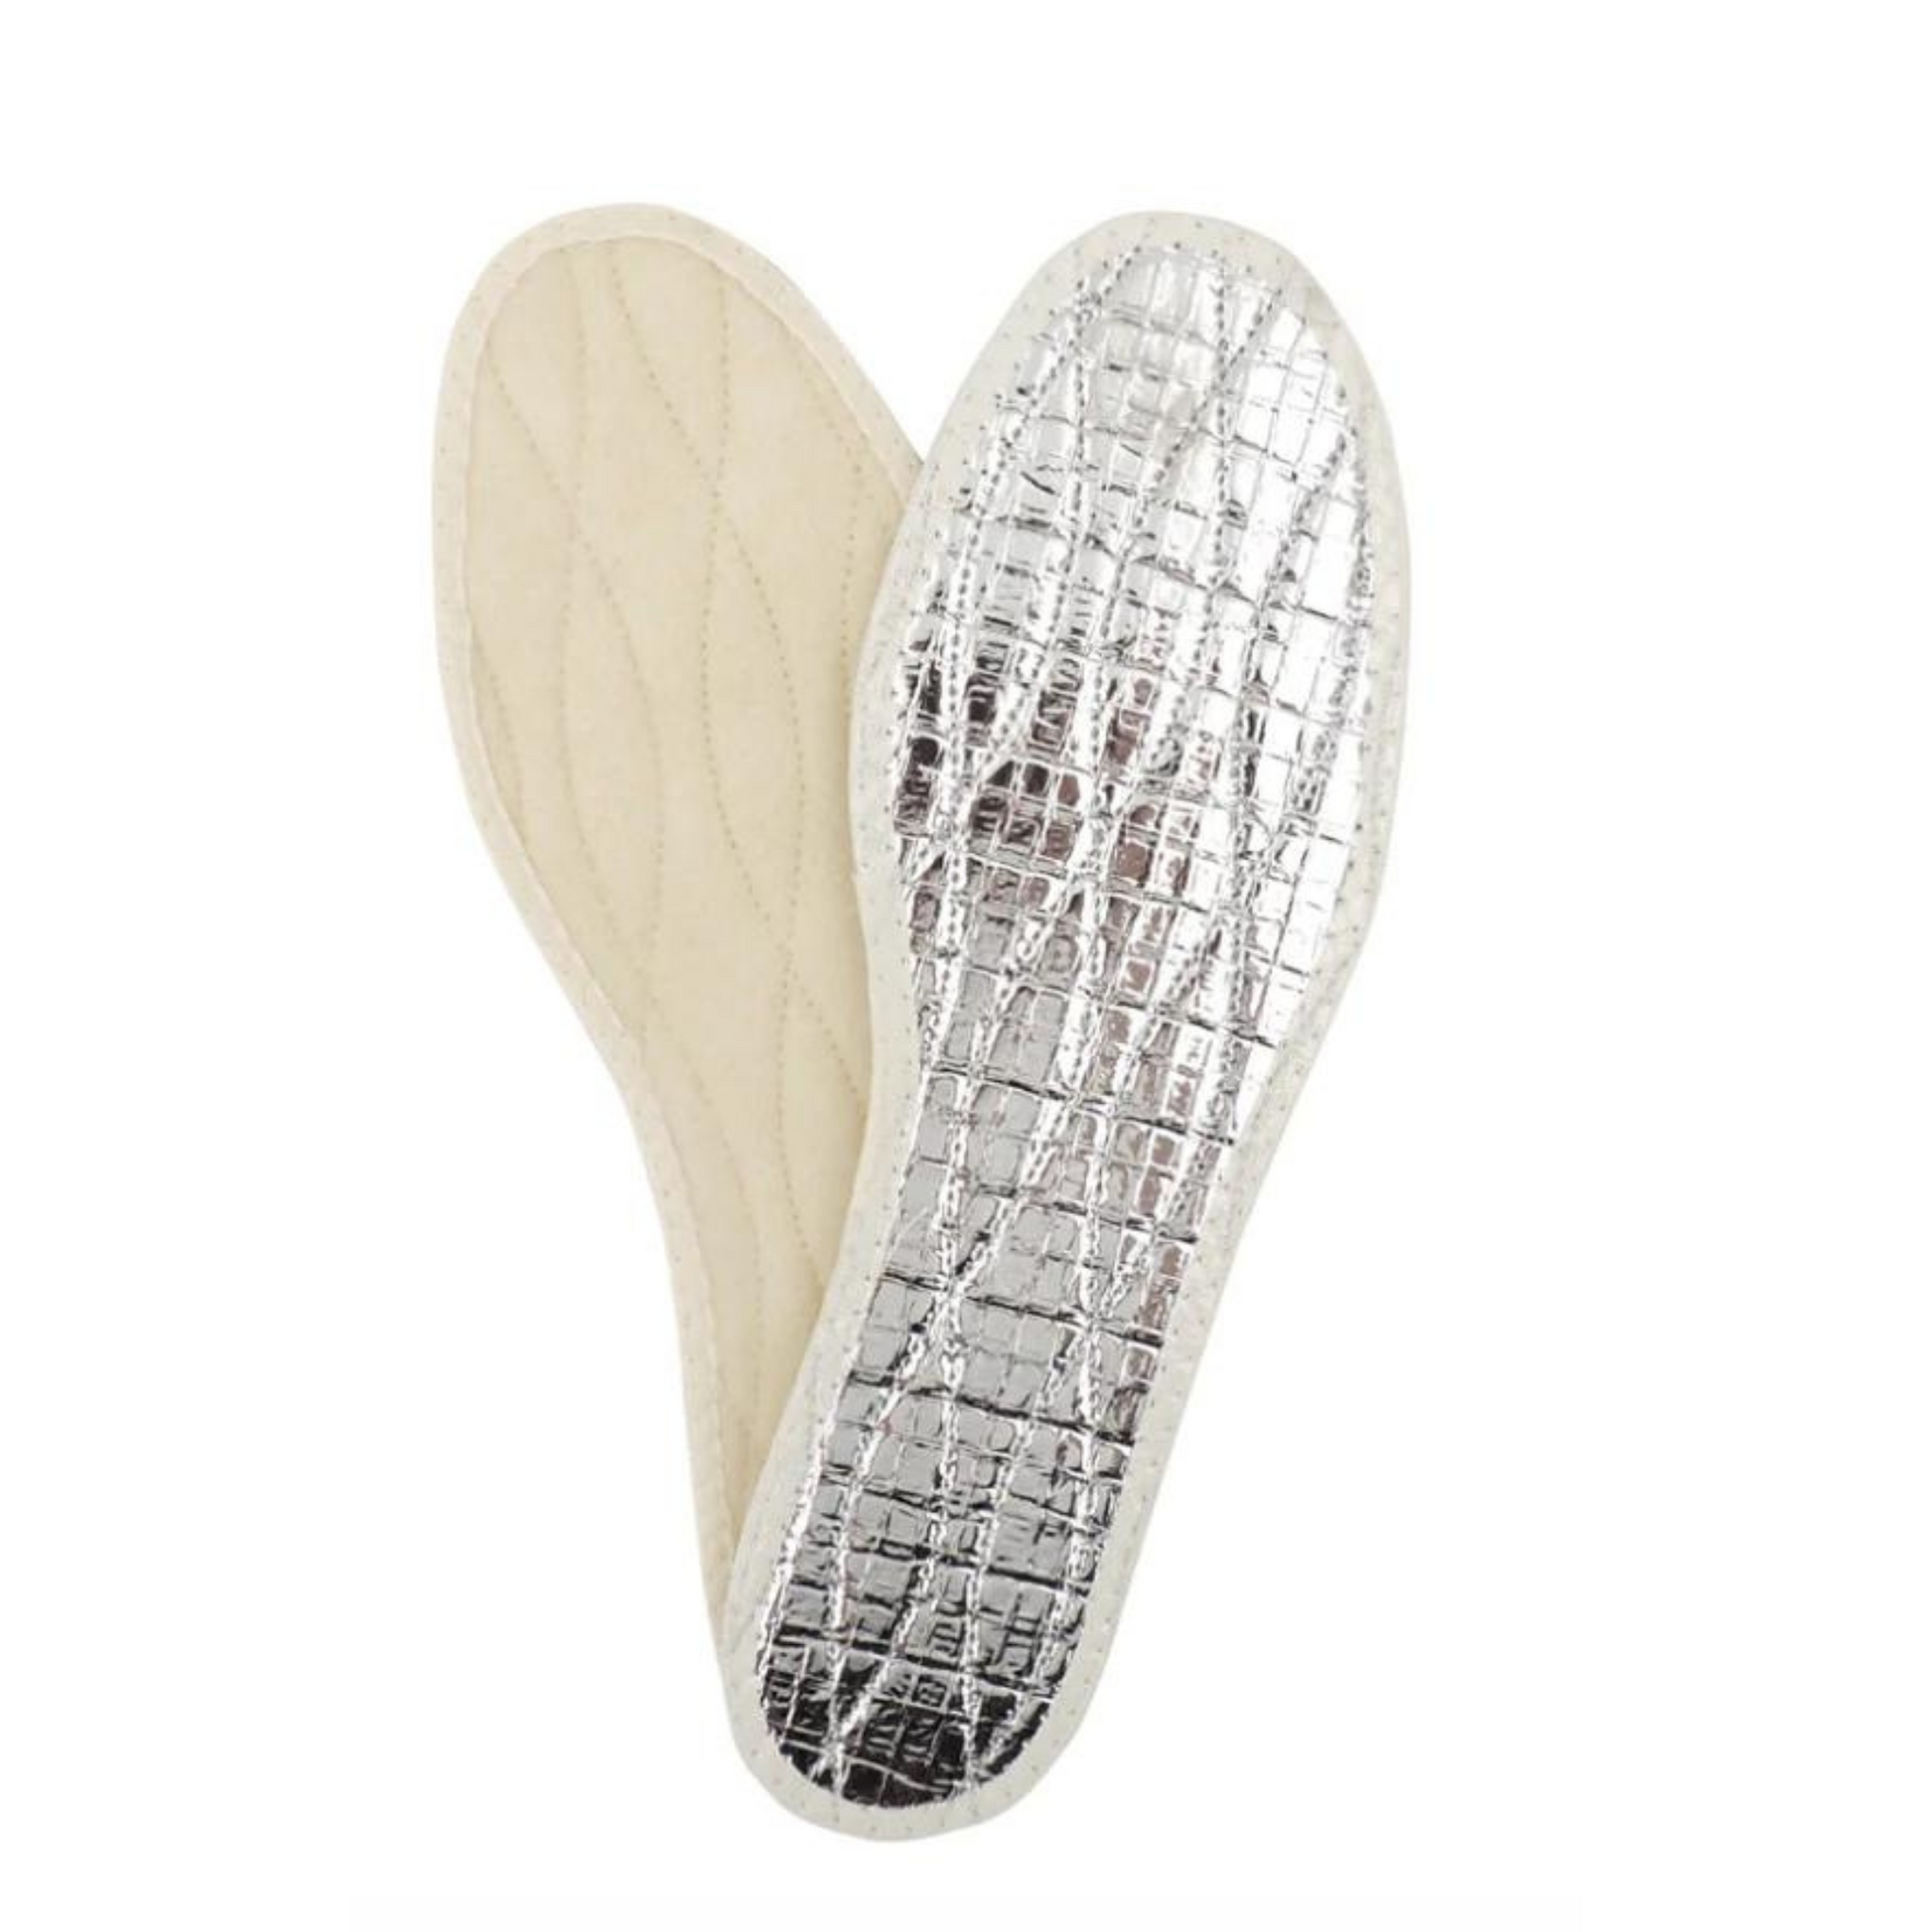 The front and back of a pair of thermal insoles, one side being cream coloured and the other shiny silver.